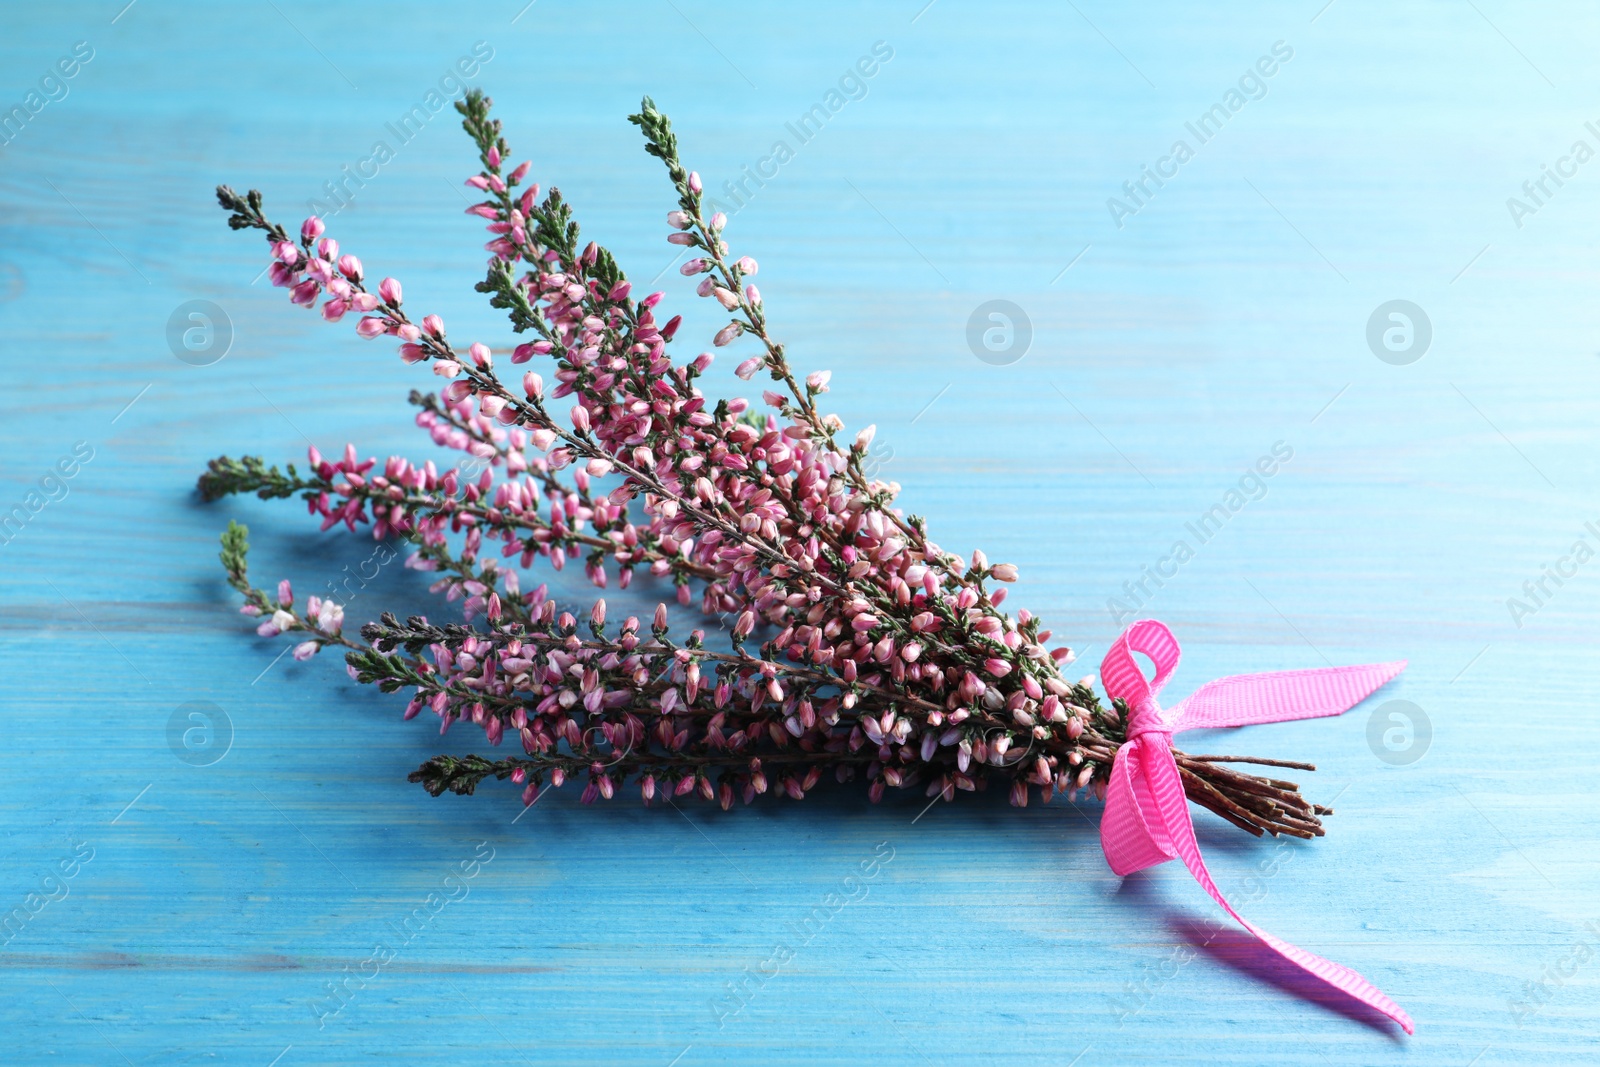 Photo of Bunch of heather branches with beautiful flowers and ribbon on light blue wooden table